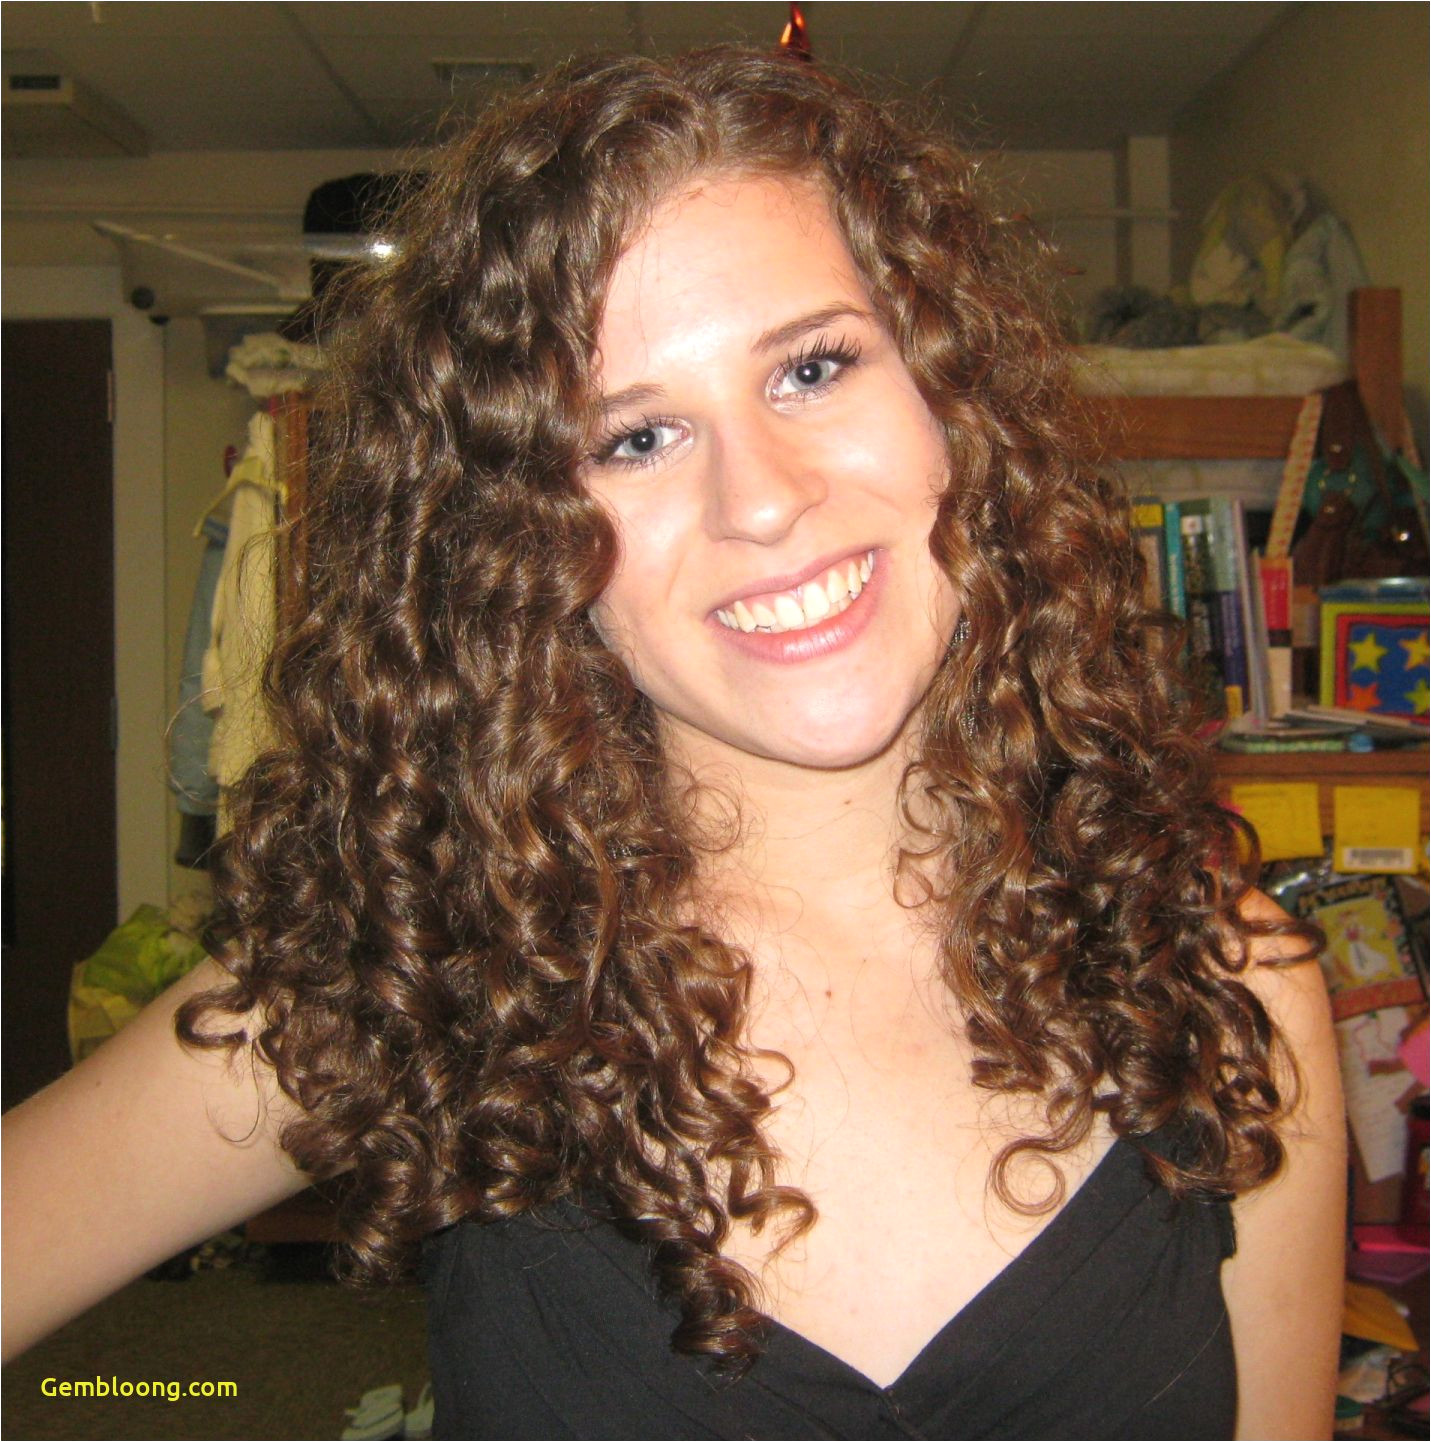 Hairstyles for Curly Knotty Hair form